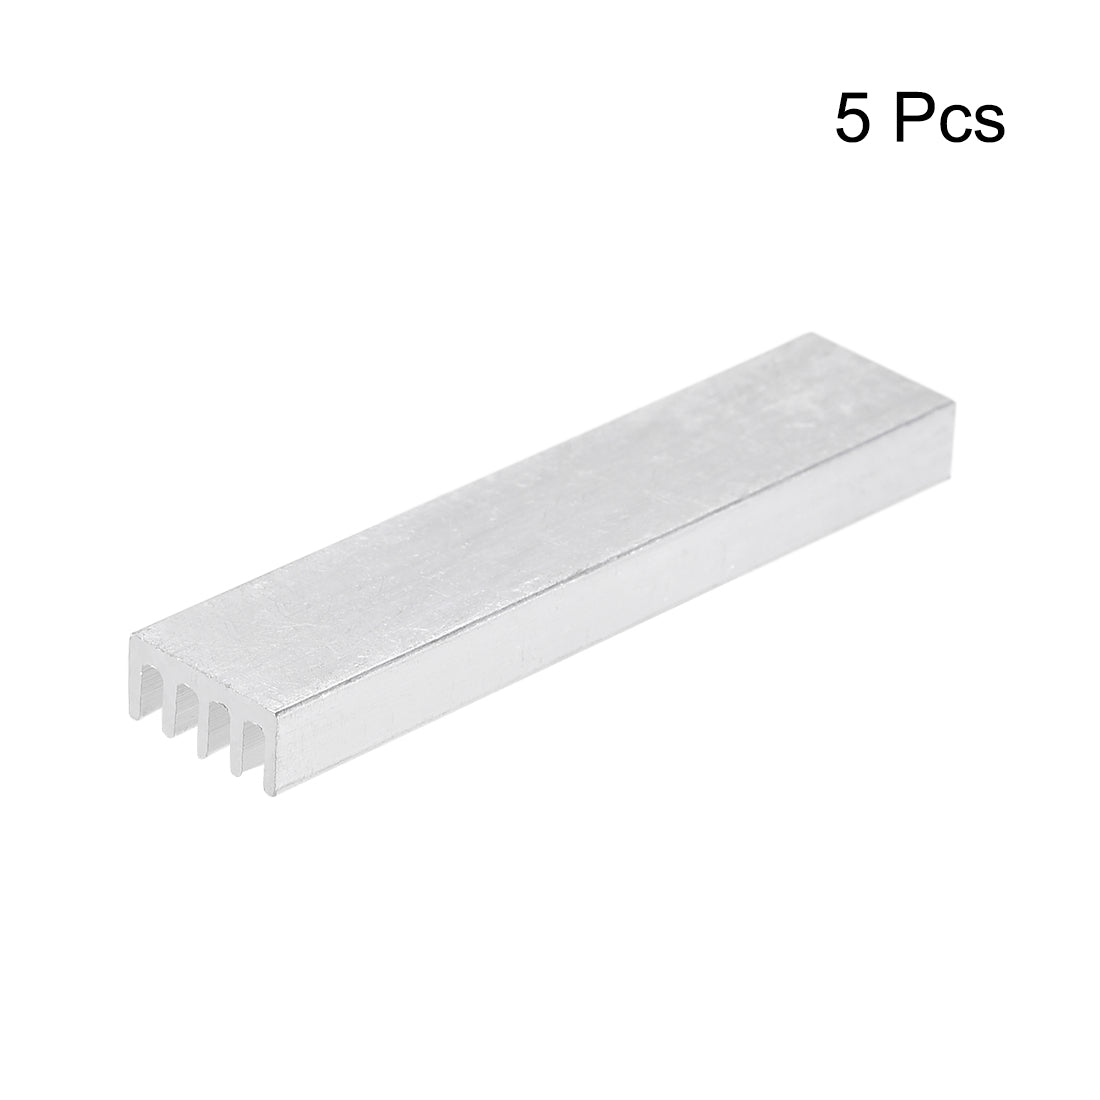 uxcell Uxcell Electronics Cooler Heatsink for MOS GPU IC Chip Silver 50 x 11 x 5 mm 5pcs